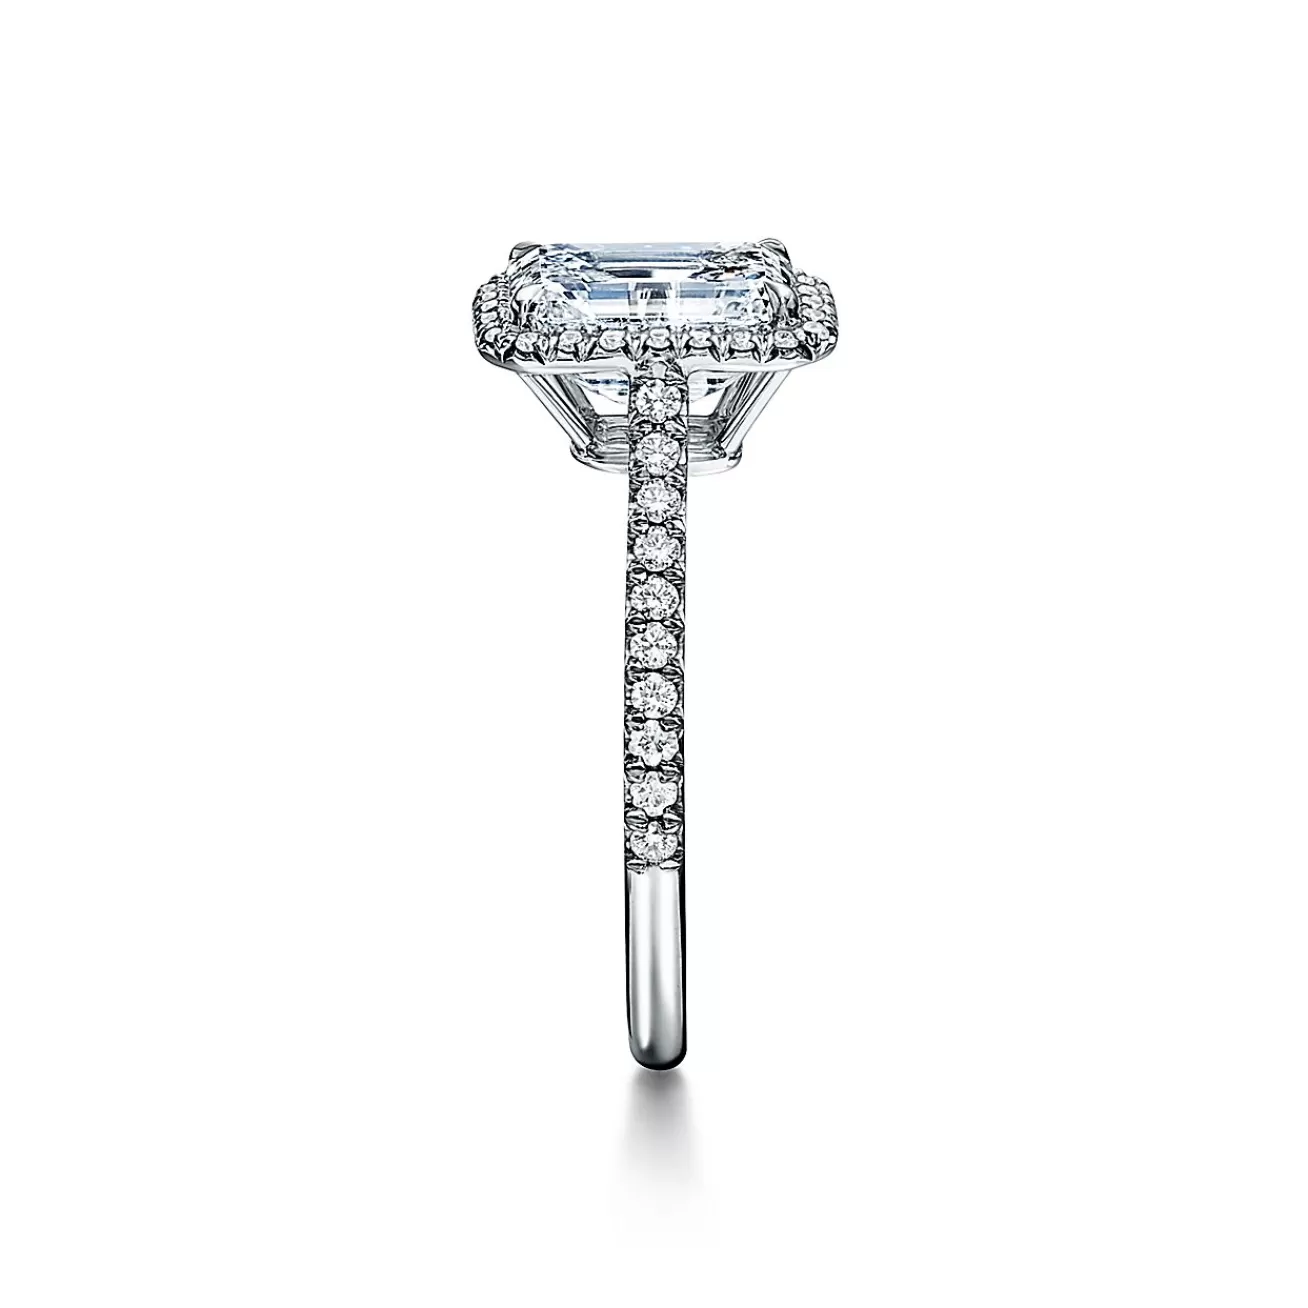 Tiffany & Co. Tiffany Soleste® emerald-cut halo engagement ring with a diamond platinum band. | ^ Engagement Rings